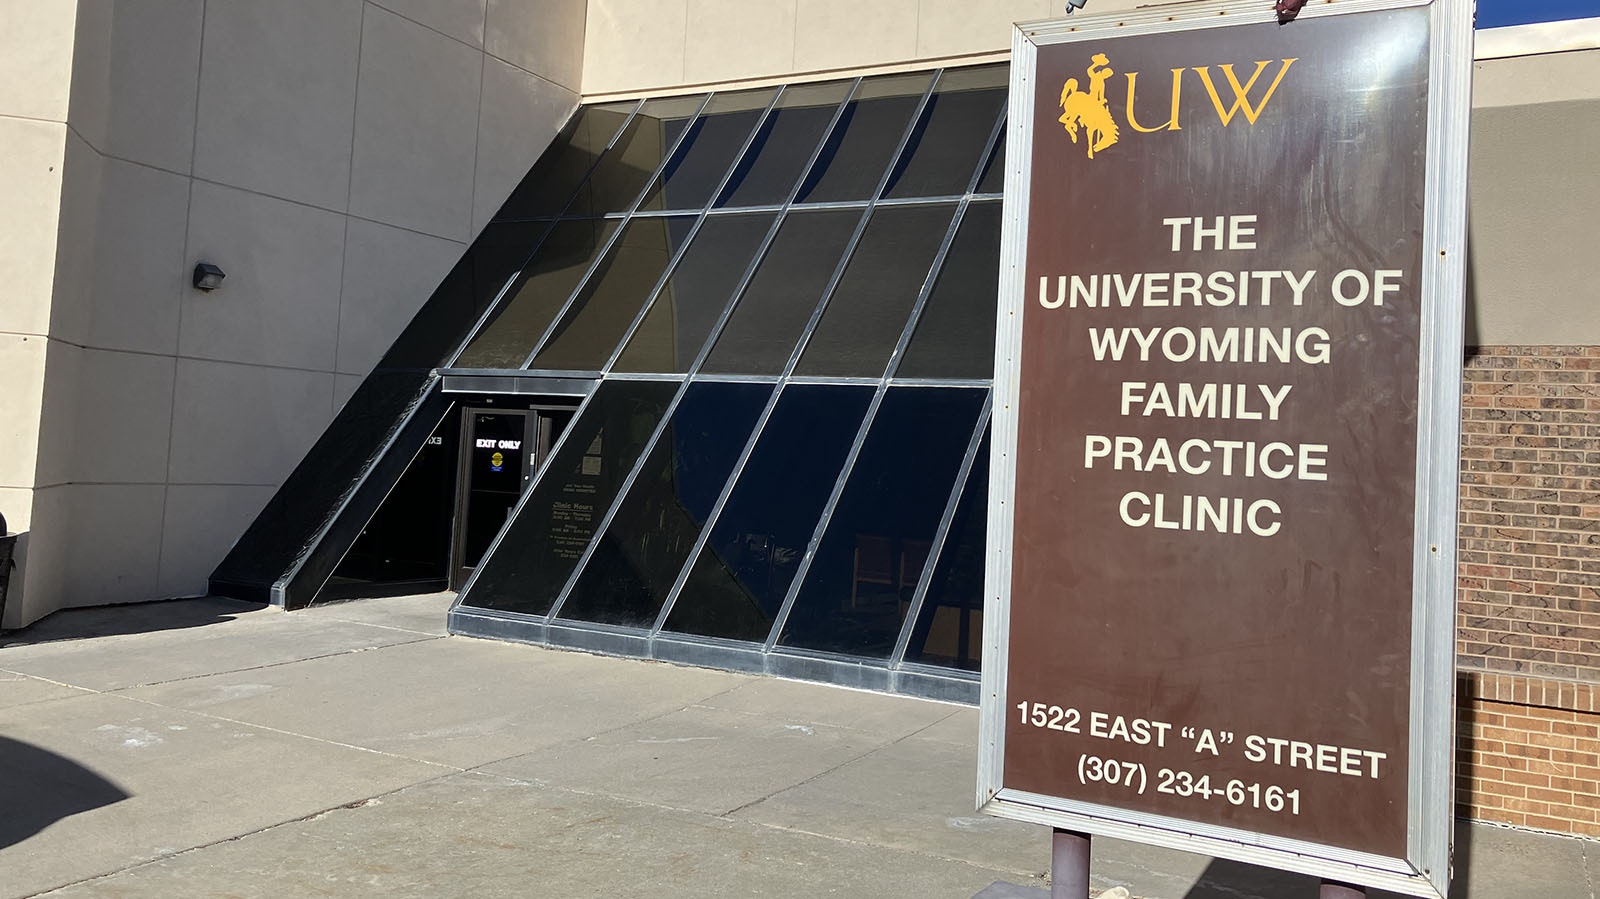 The University of Wyoming Family Practice Clinic cares for 6,000 underserved and uninsured people of Casper.